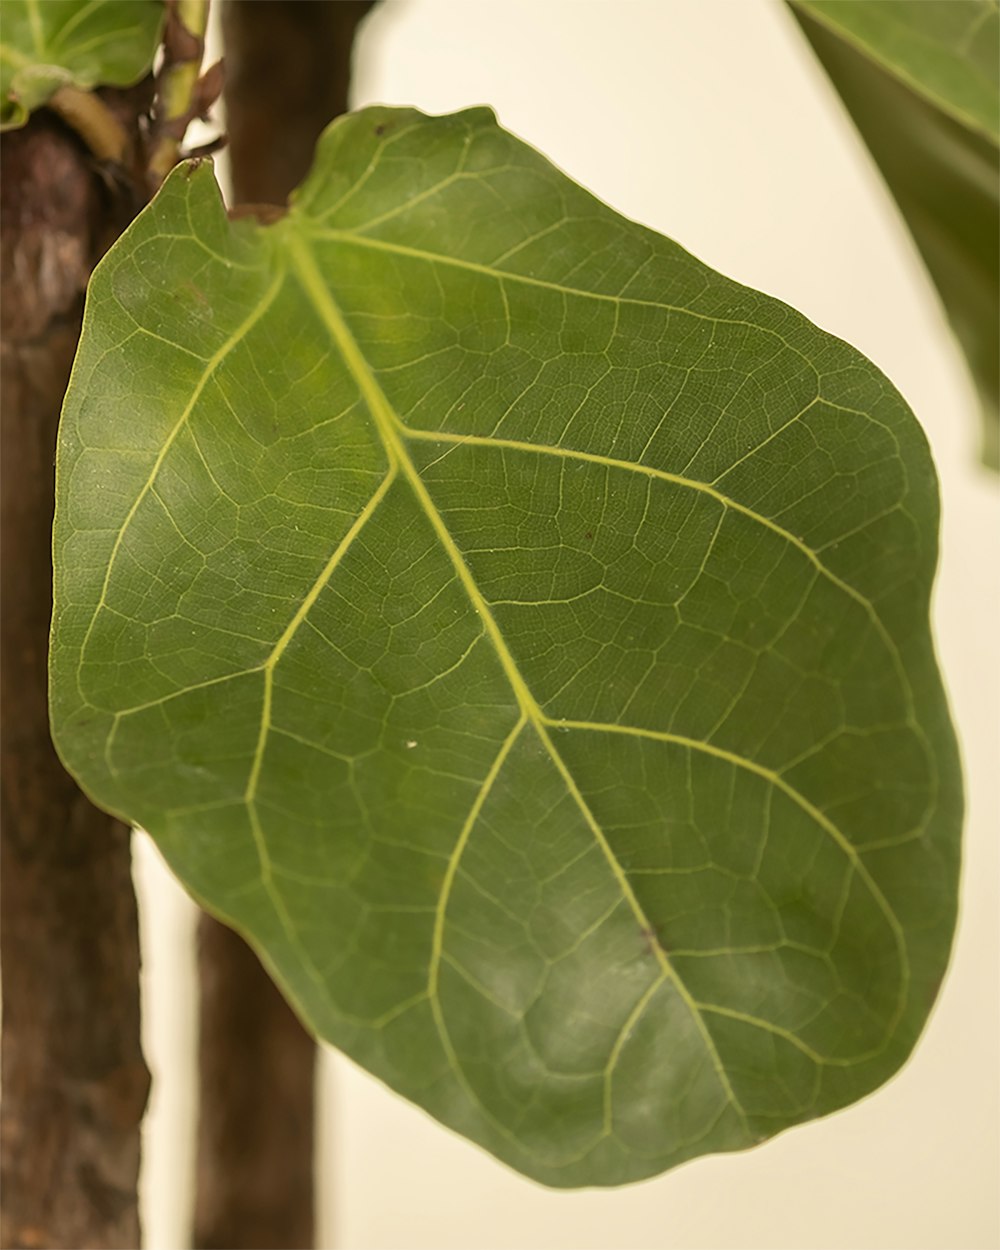 a large green leaf hanging from a tree